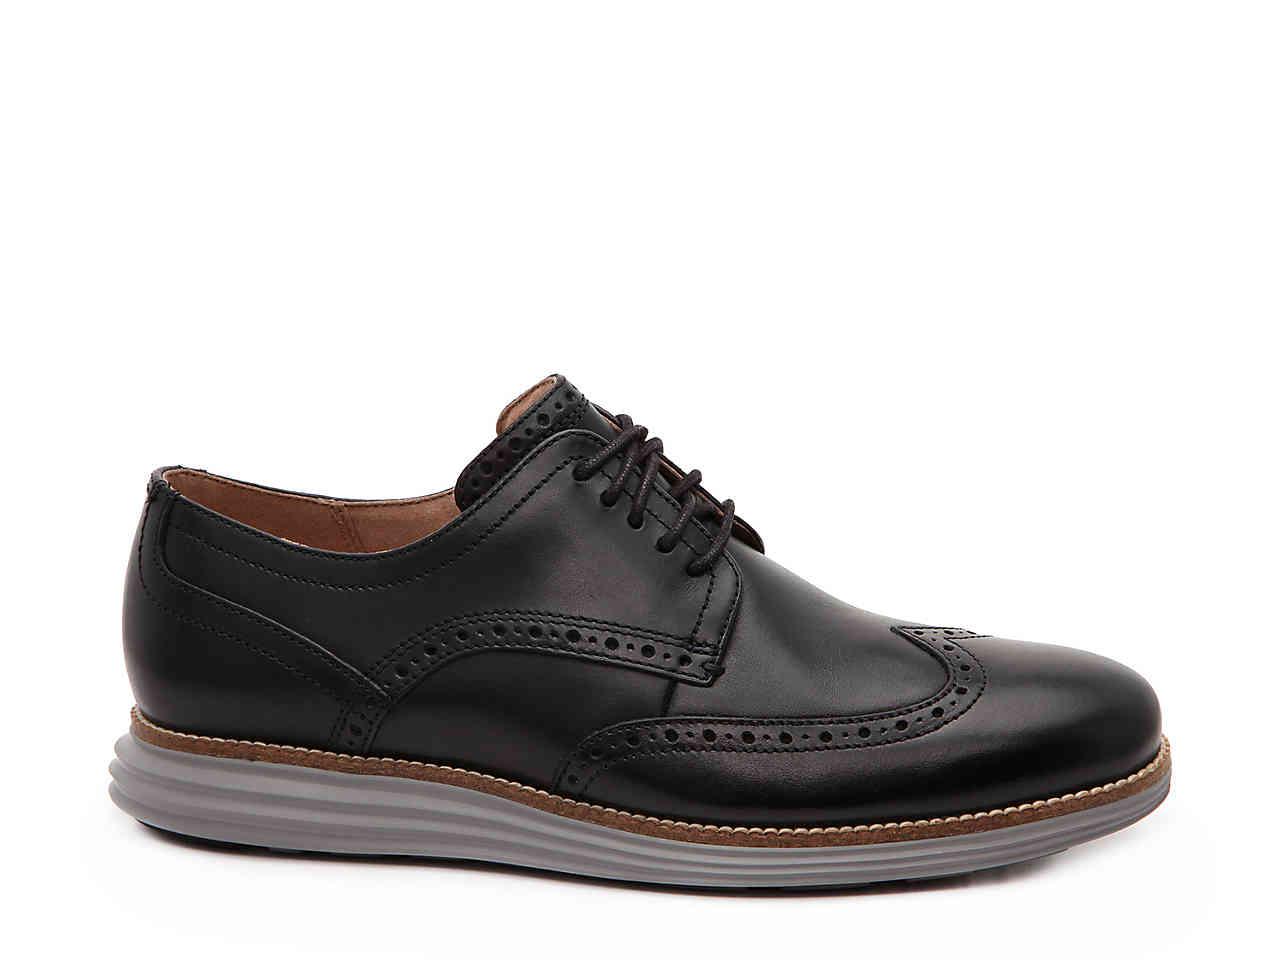 Cole Haan Leather Original Grand Wingtip Oxford in Black for Men - Lyst